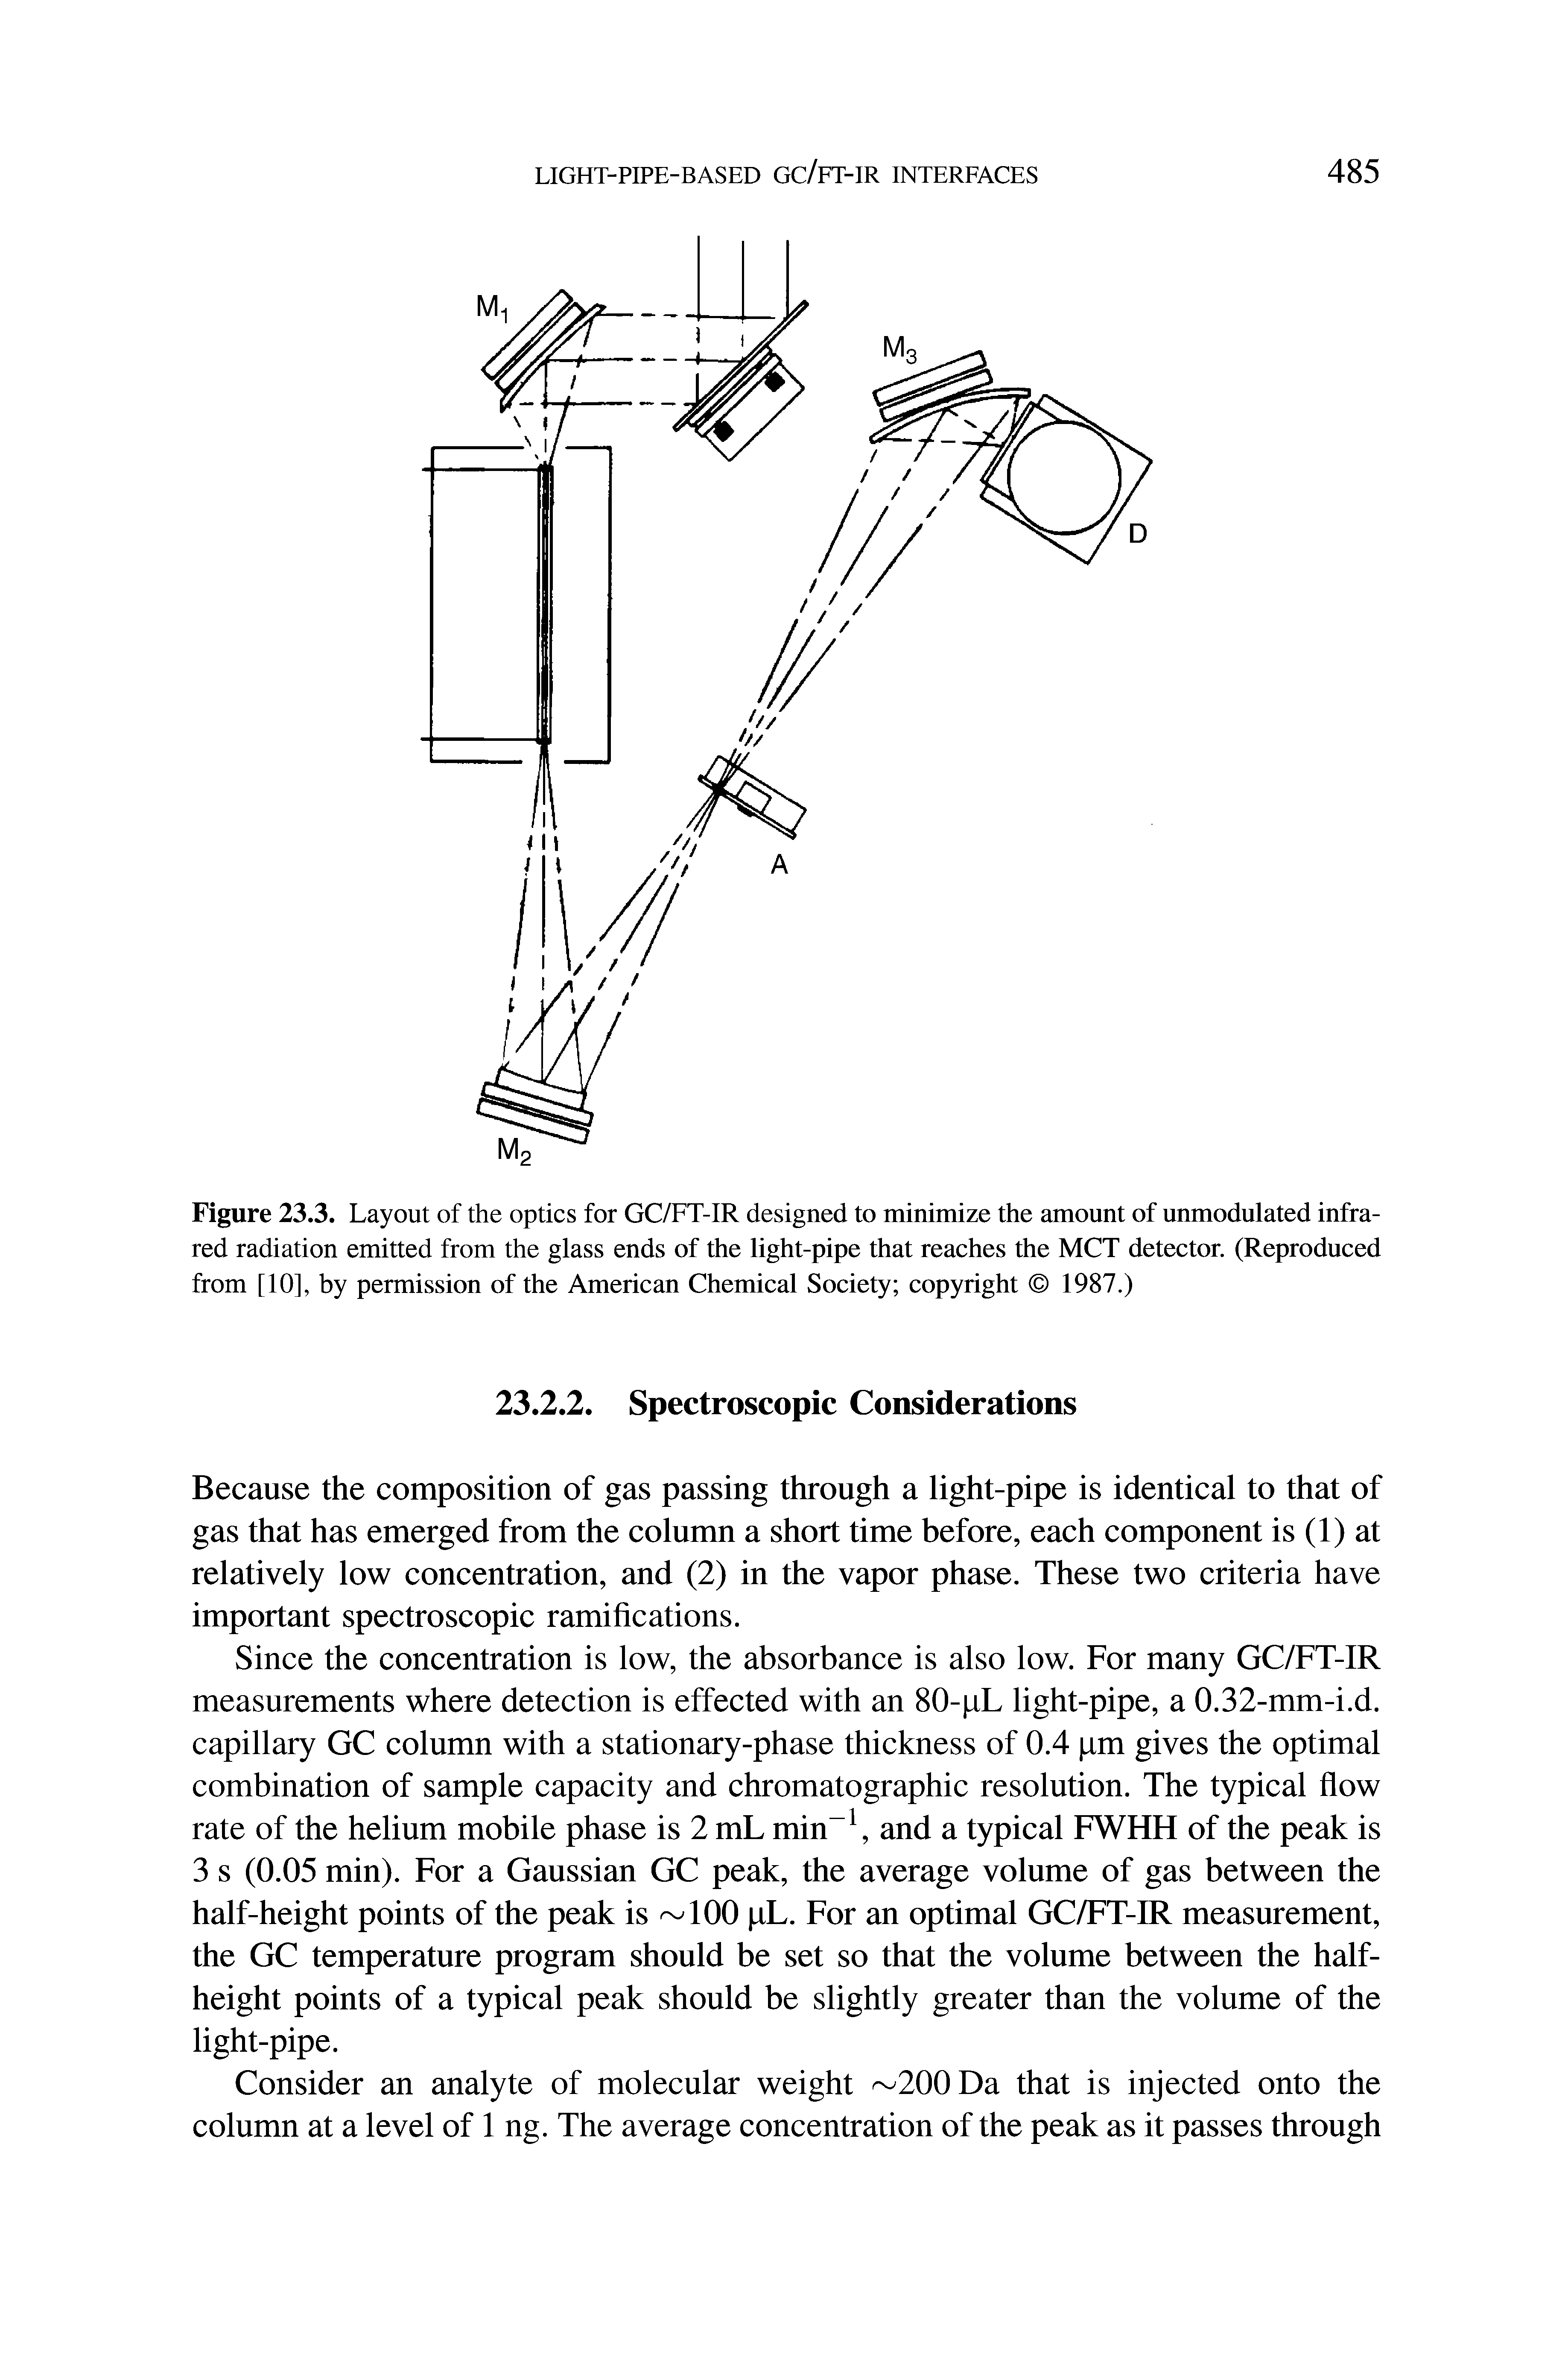 Figure 23.3. Layout of the optics for GC/FT-IR designed to minimize the amount of unmodulated infrared radiation emitted from the glass ends of the light-pipe that reaches the MCT detector. (Reproduced from [10], by permission of the American Chemical Society copyright 1987.)...